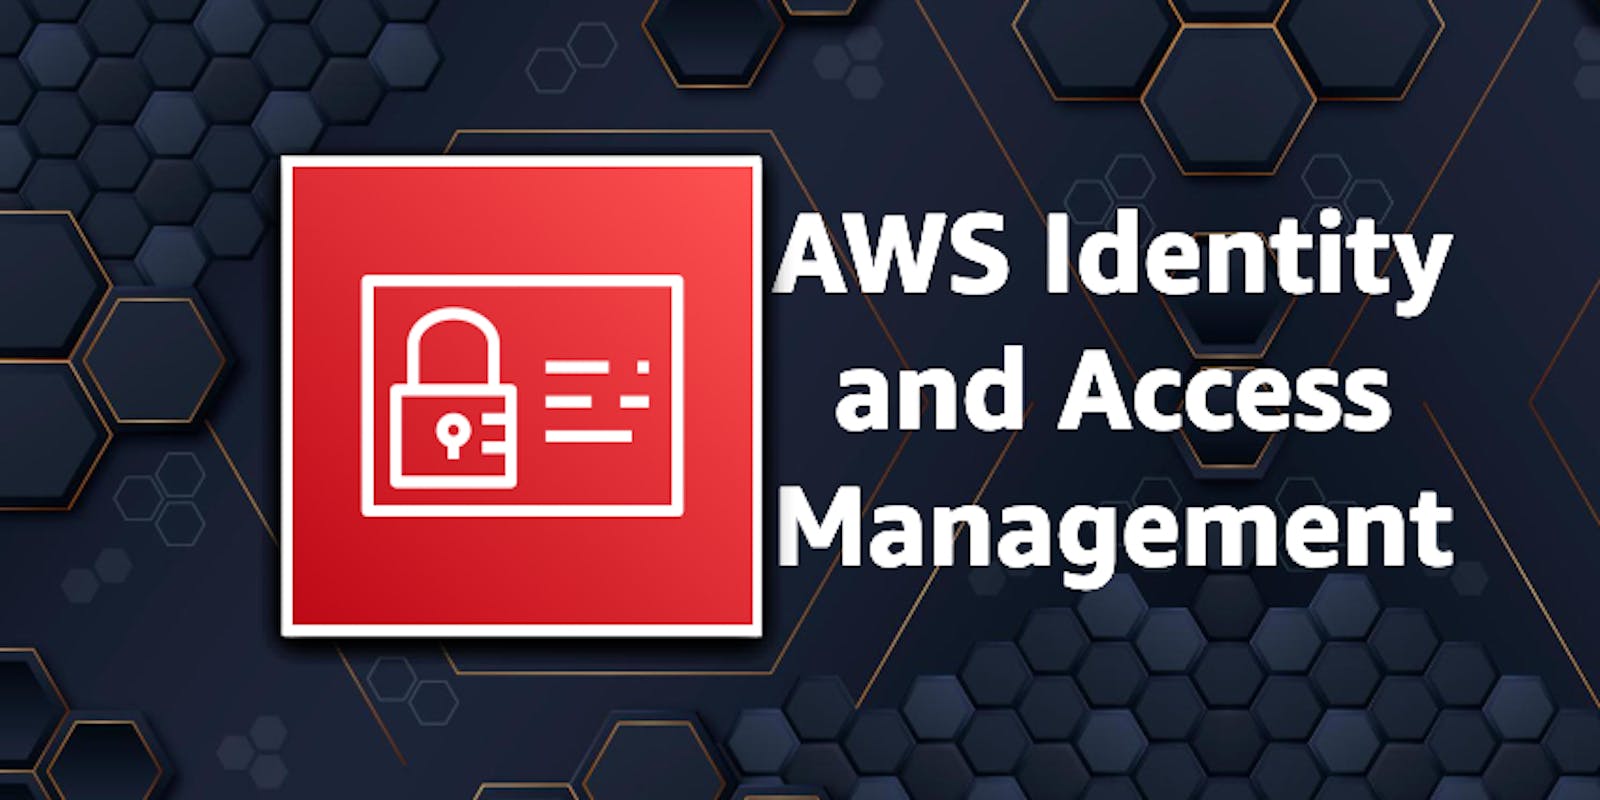 Understanding different AWS identities and their specific use cases